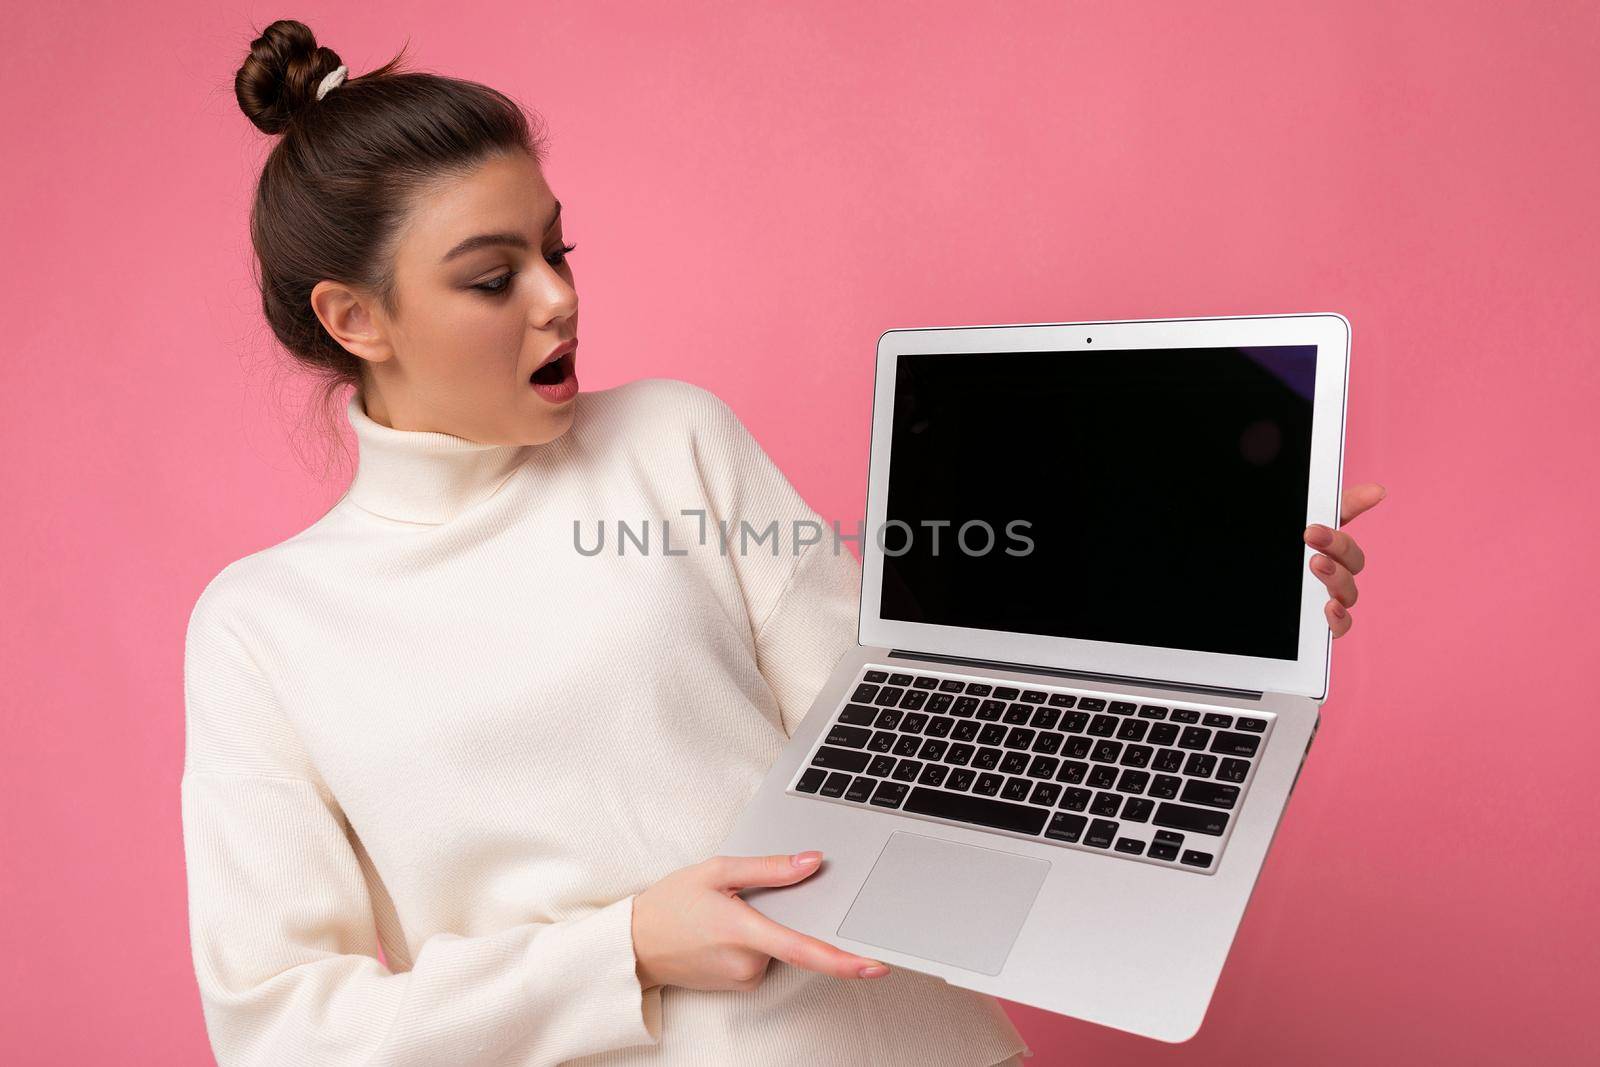 Photo of beautiful amazed and surprised woman with gathered brunette hair wearing white sweater holding computer laptop and looking at the open netbook isolated over pink wall background.